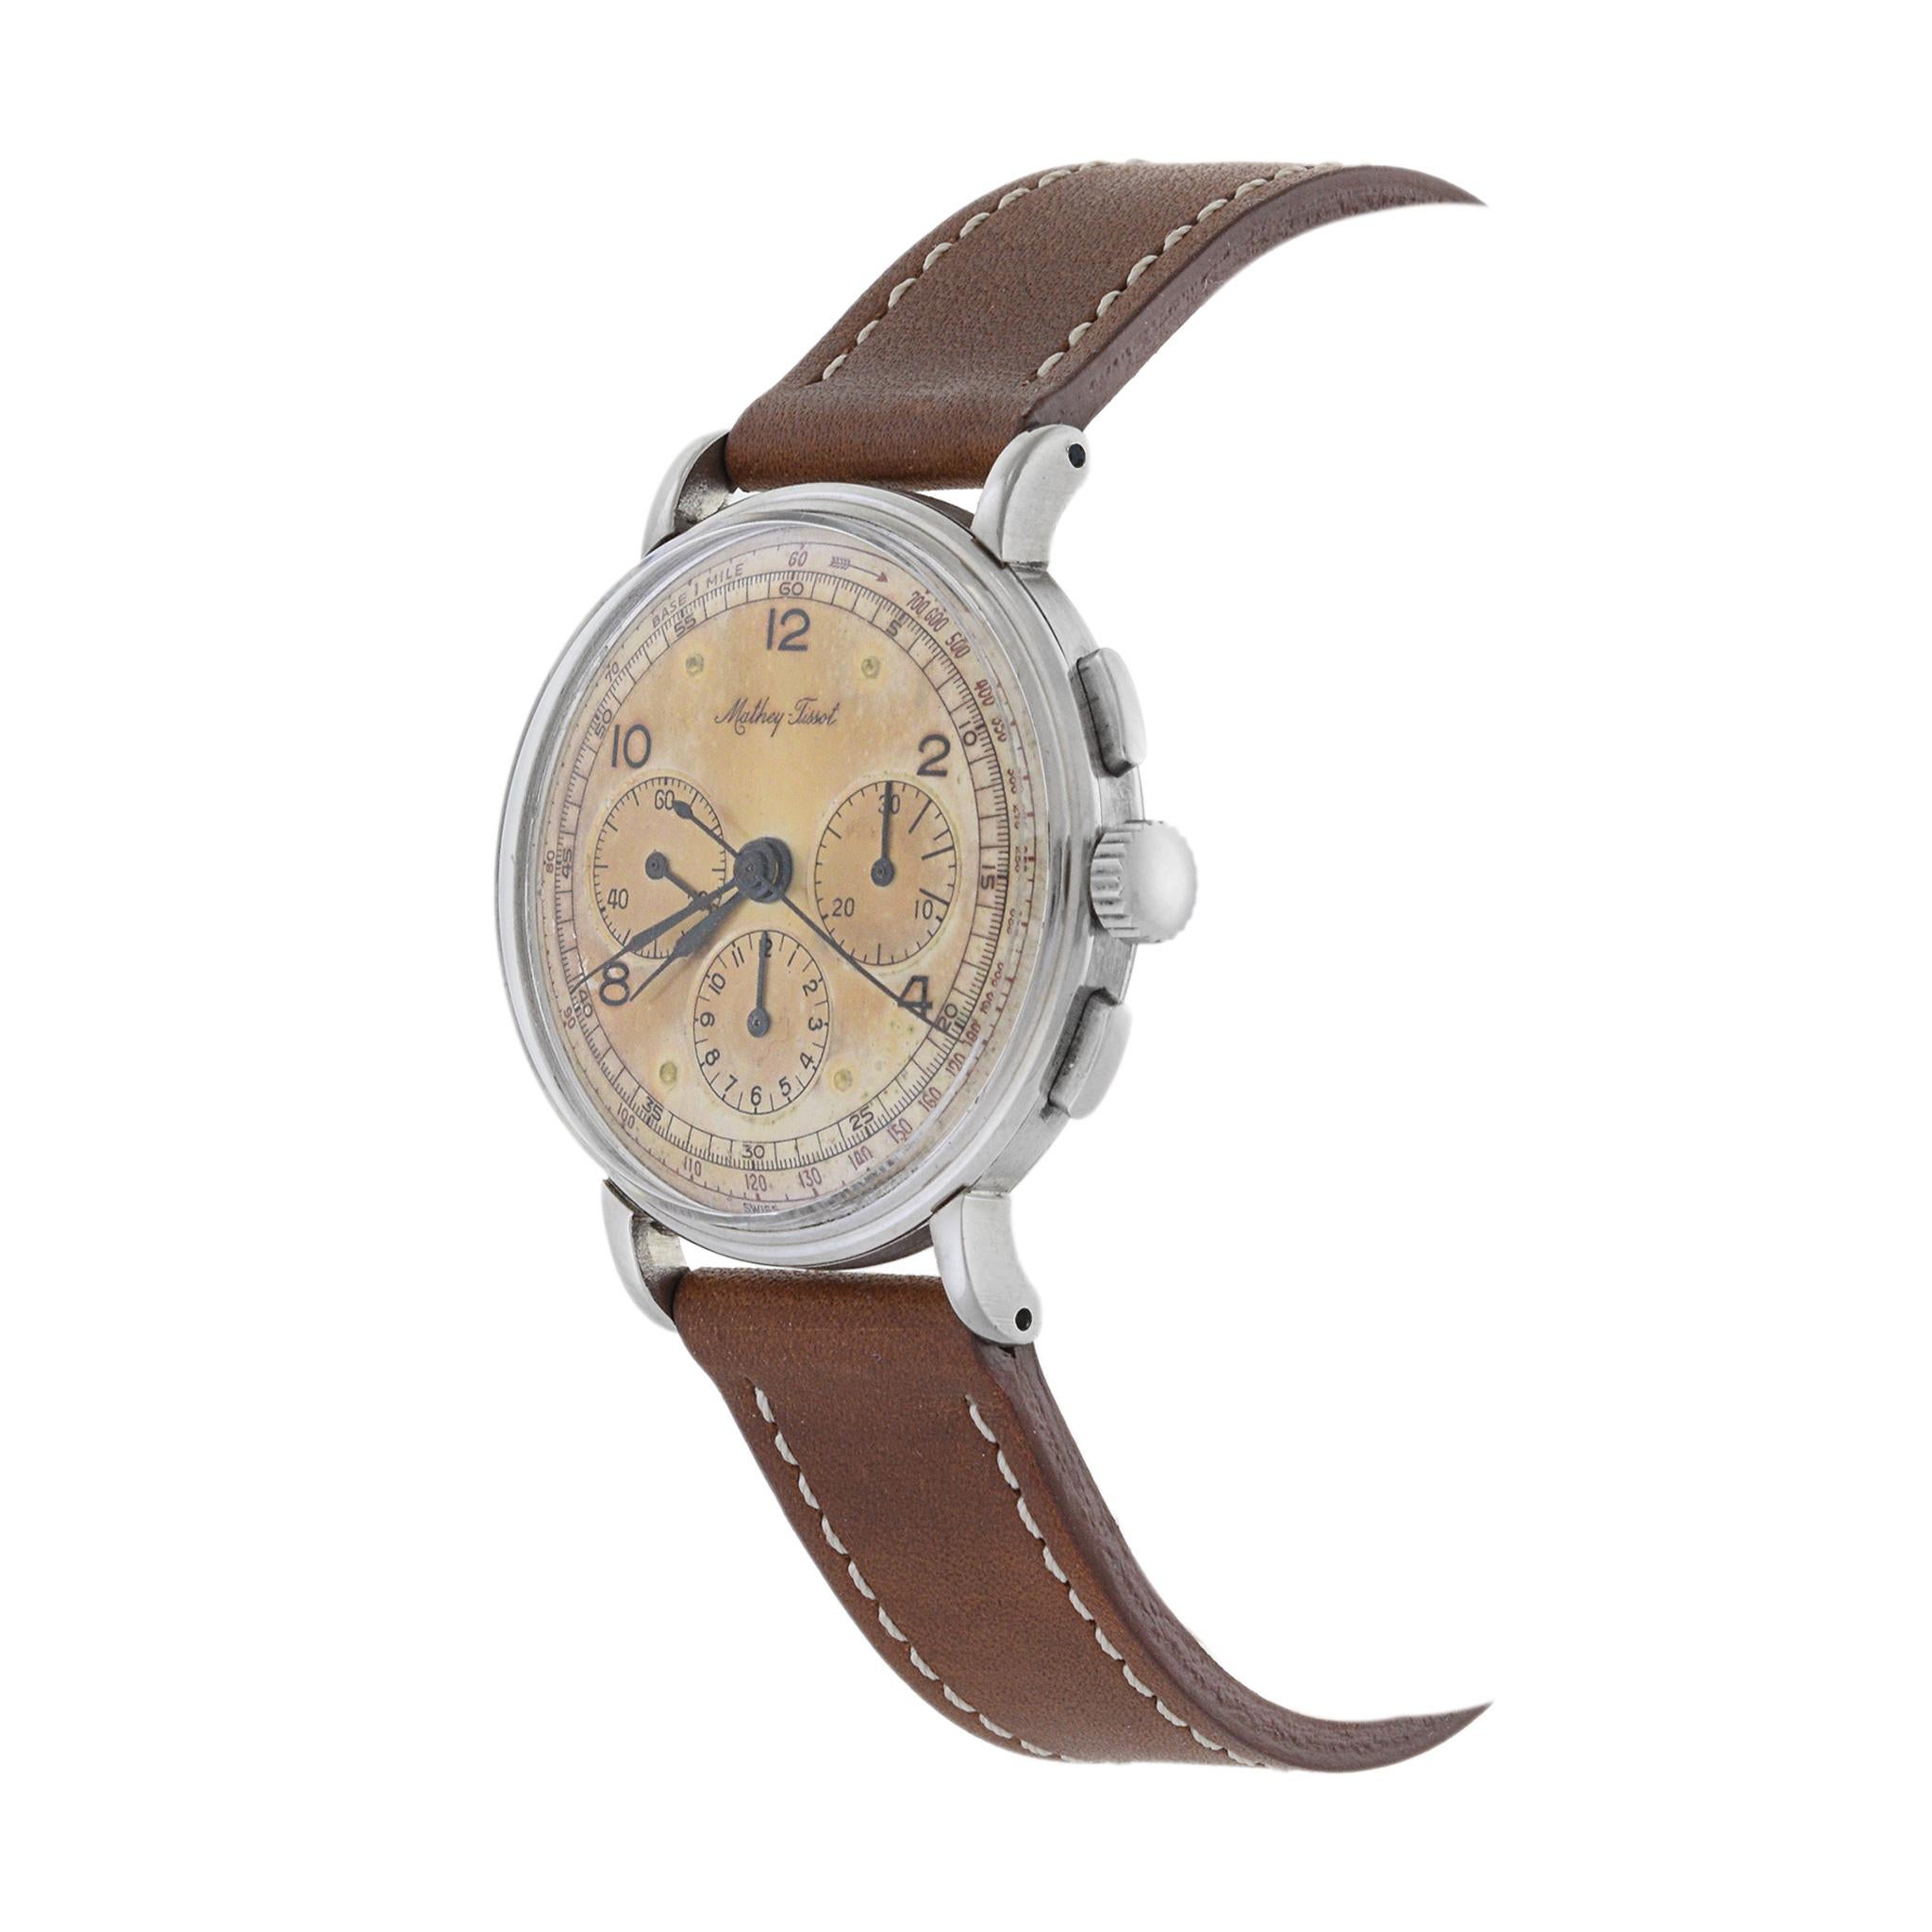 Retro Mathey Tissot 1940's Stainless Steel Chronograph For Sale